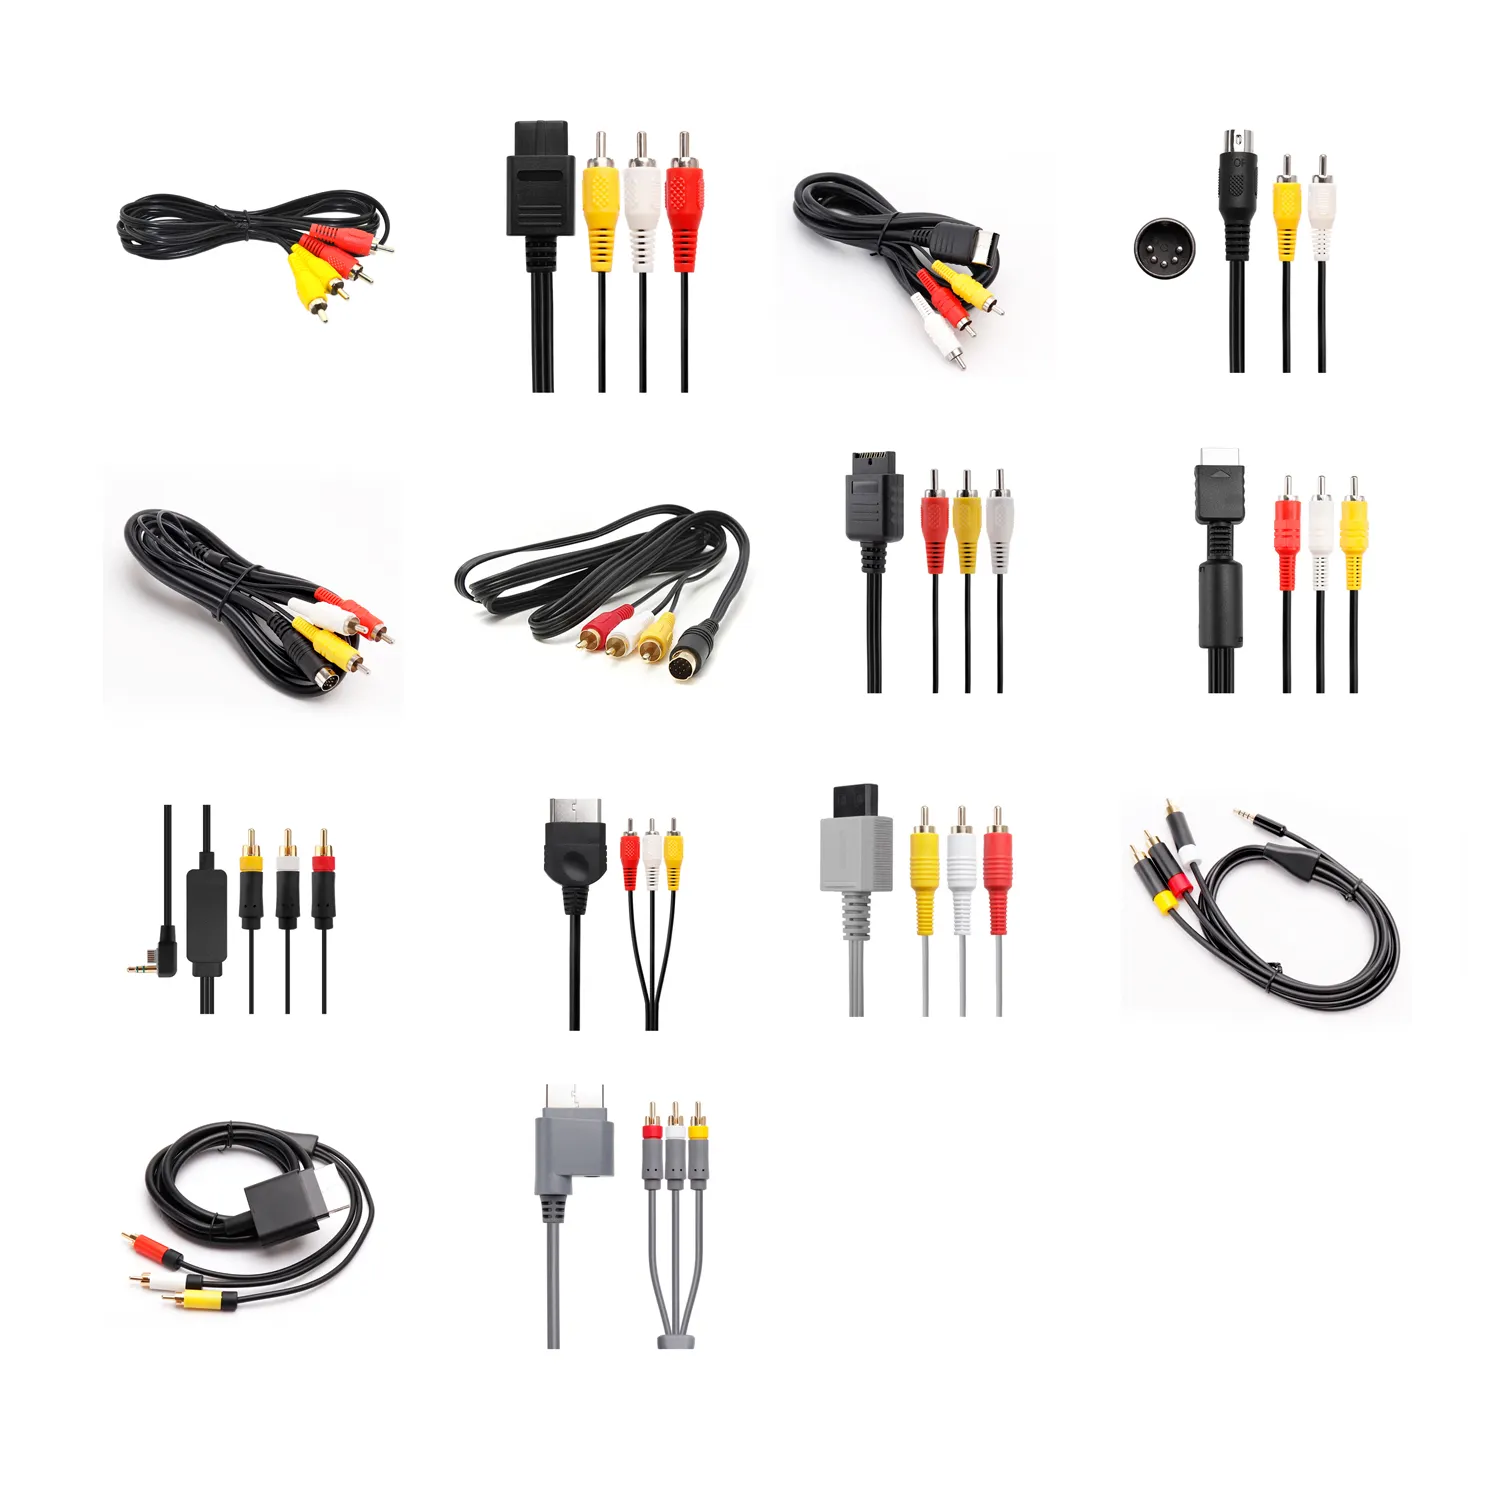 Cable Av Cable para nes/n64/gamecube/snes/genesis/dreamcast/Saturno/Wii/wii u/ps2/ps3/ps5/xbox 360 Slim Hd Tv Cable Rca Av